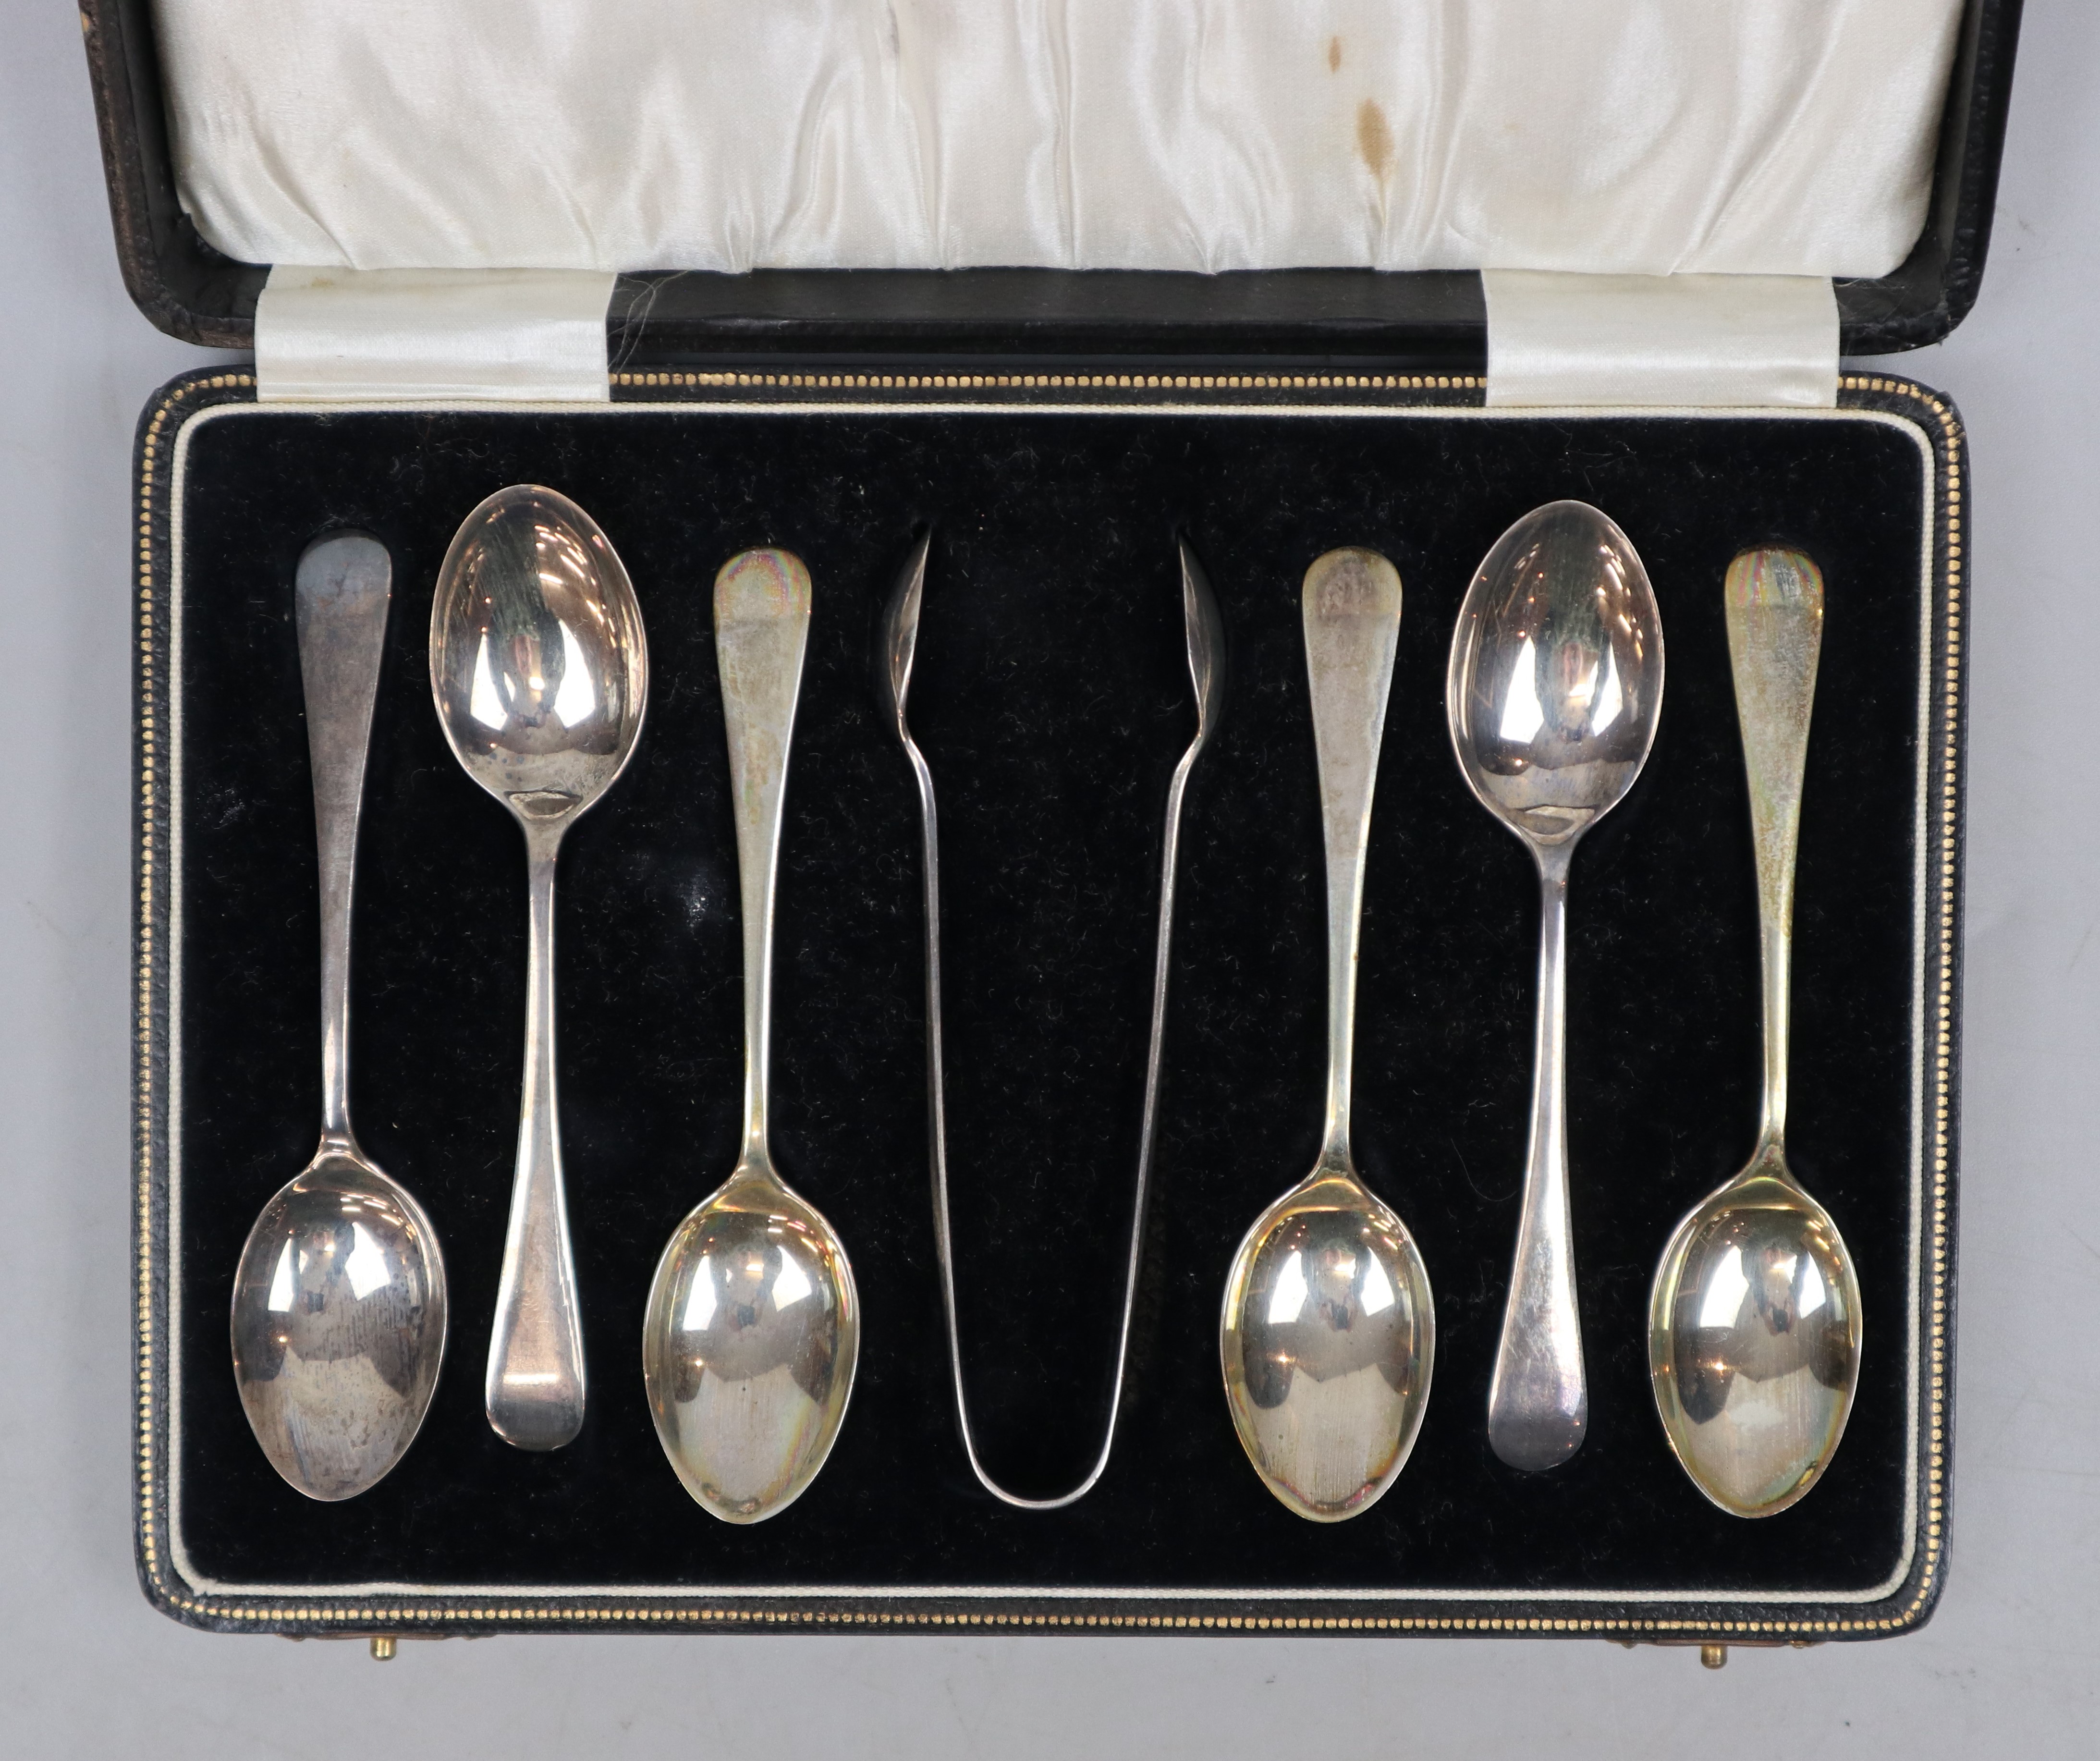 Cased set of 6 silver spoons together with sugar tongs - Approx weight 93g - Image 2 of 2